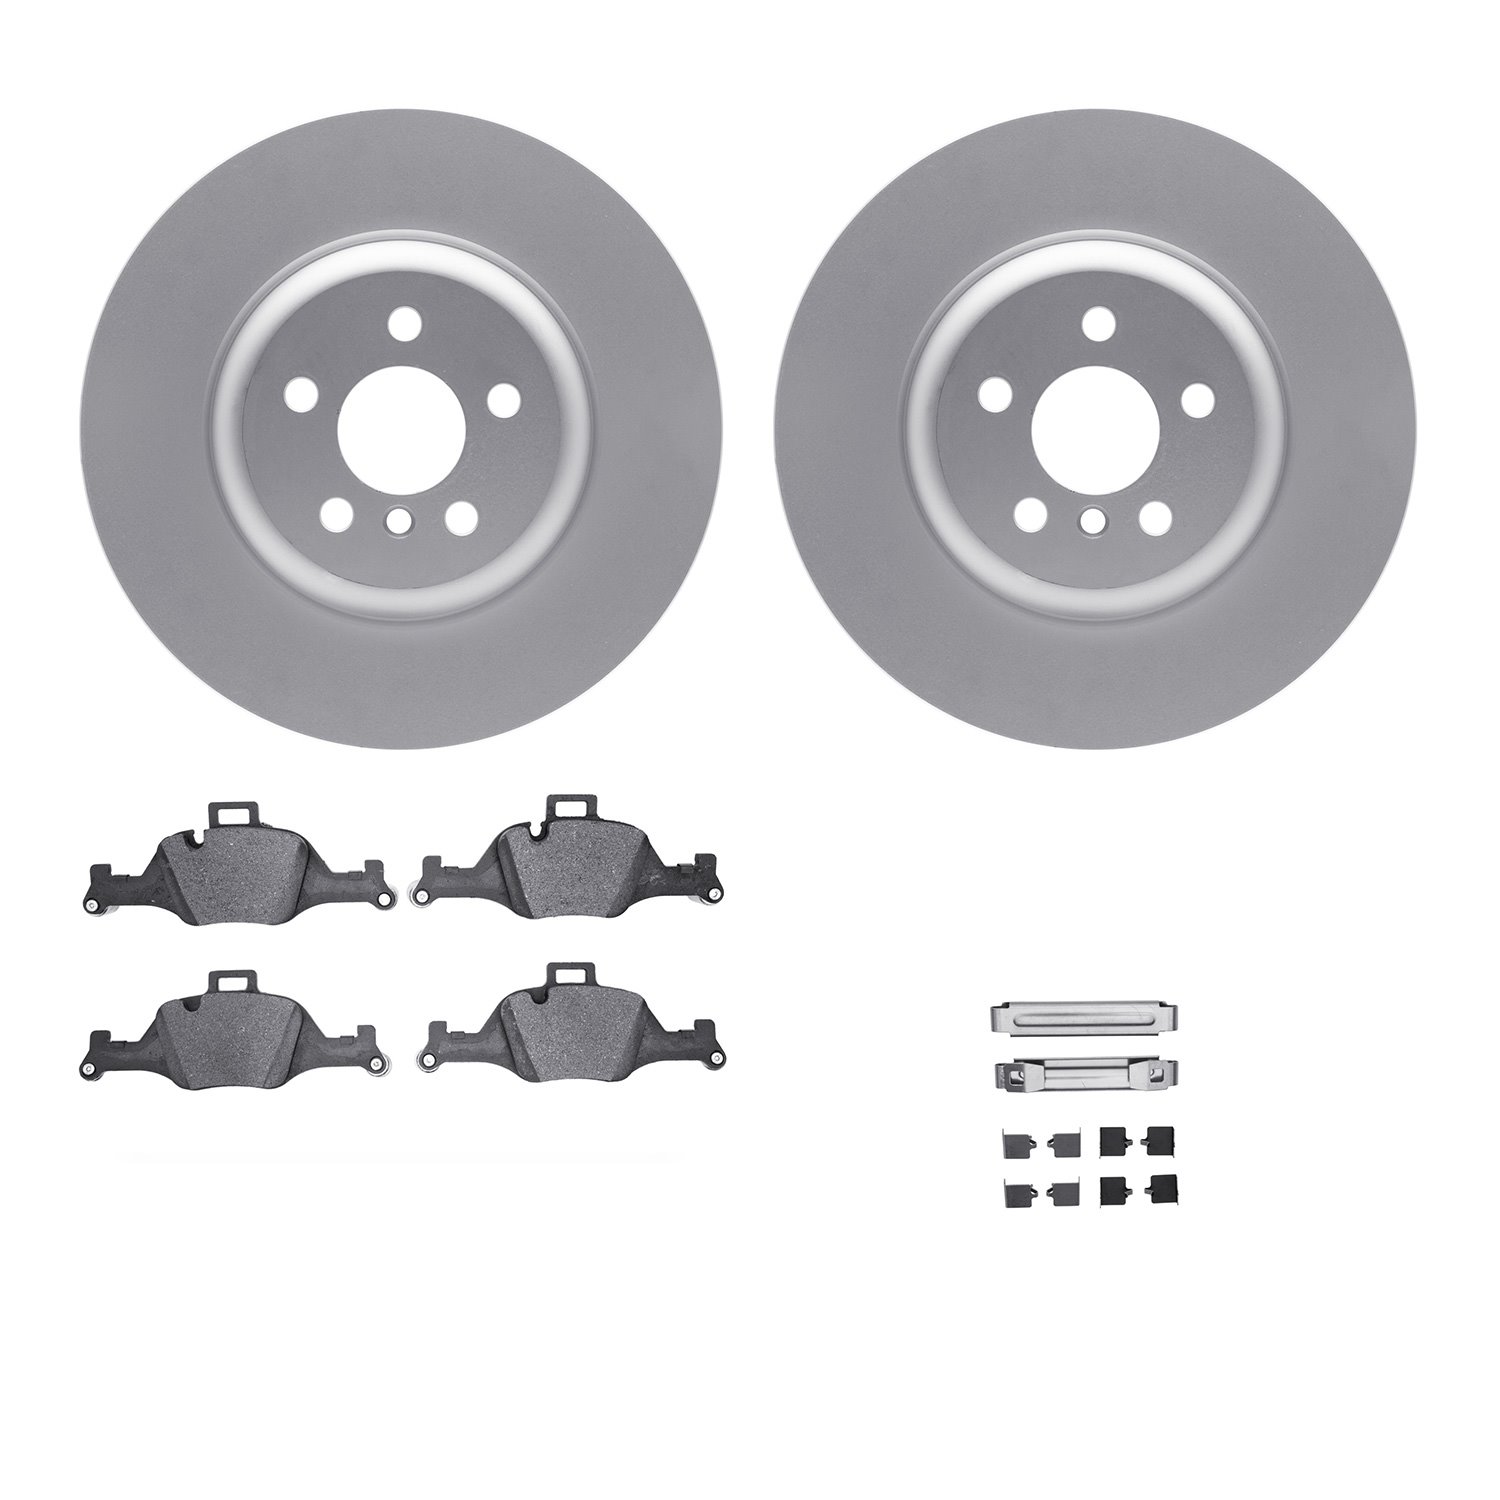 4312-31097 Geospec Brake Rotors with 3000-Series Ceramic Brake Pads & Hardware, Fits Select BMW, Position: Front